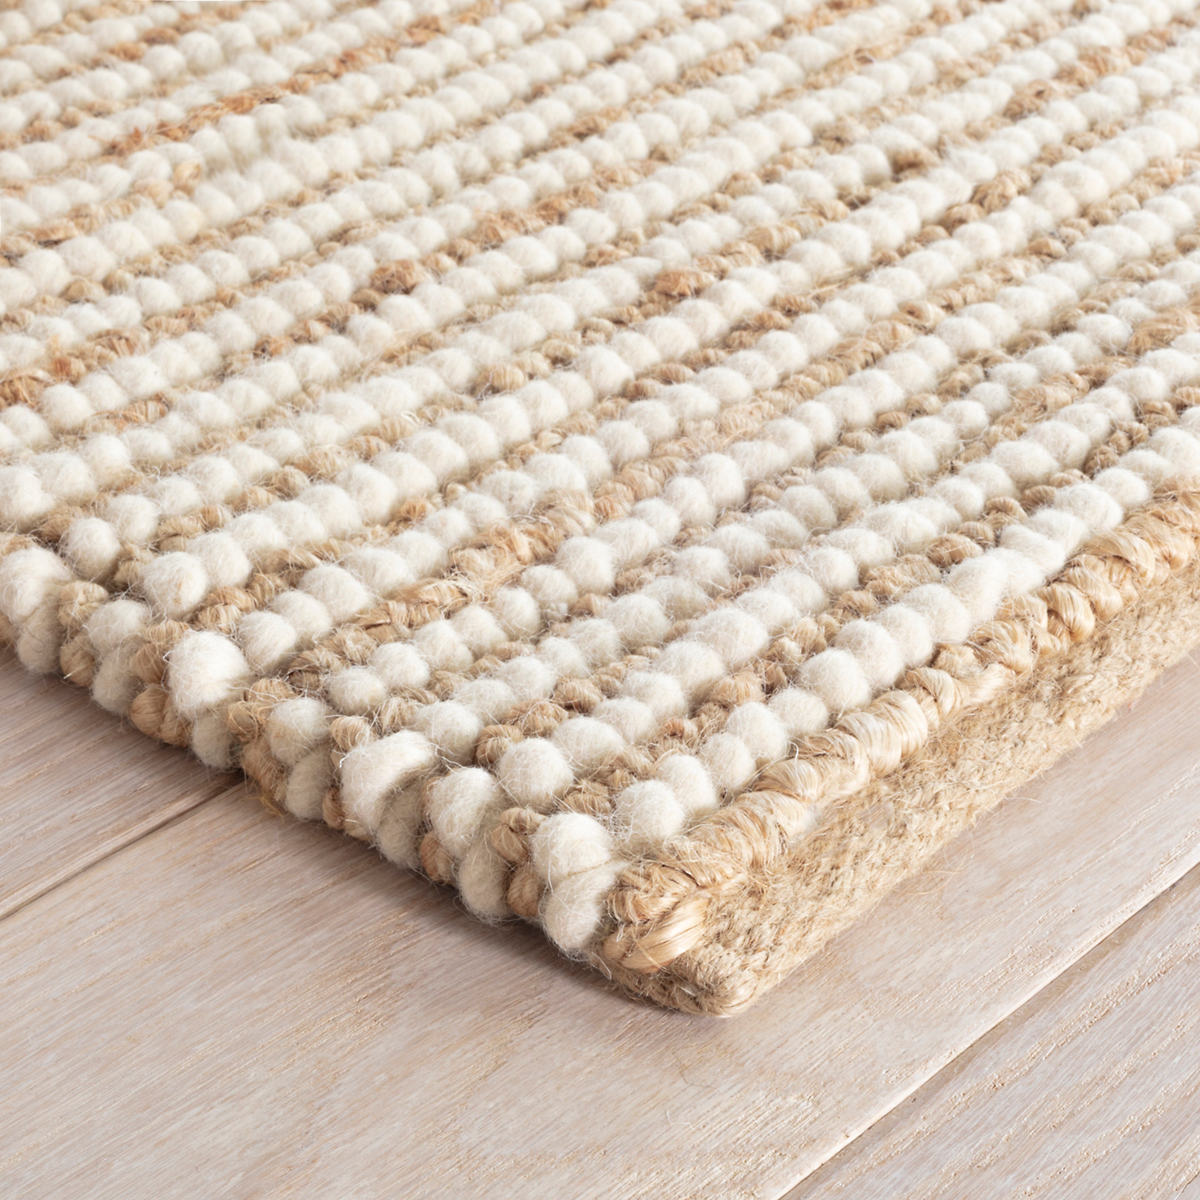 Twiggy Natural Woven Wool Jute Rug, Natural Woven Rugs Uk